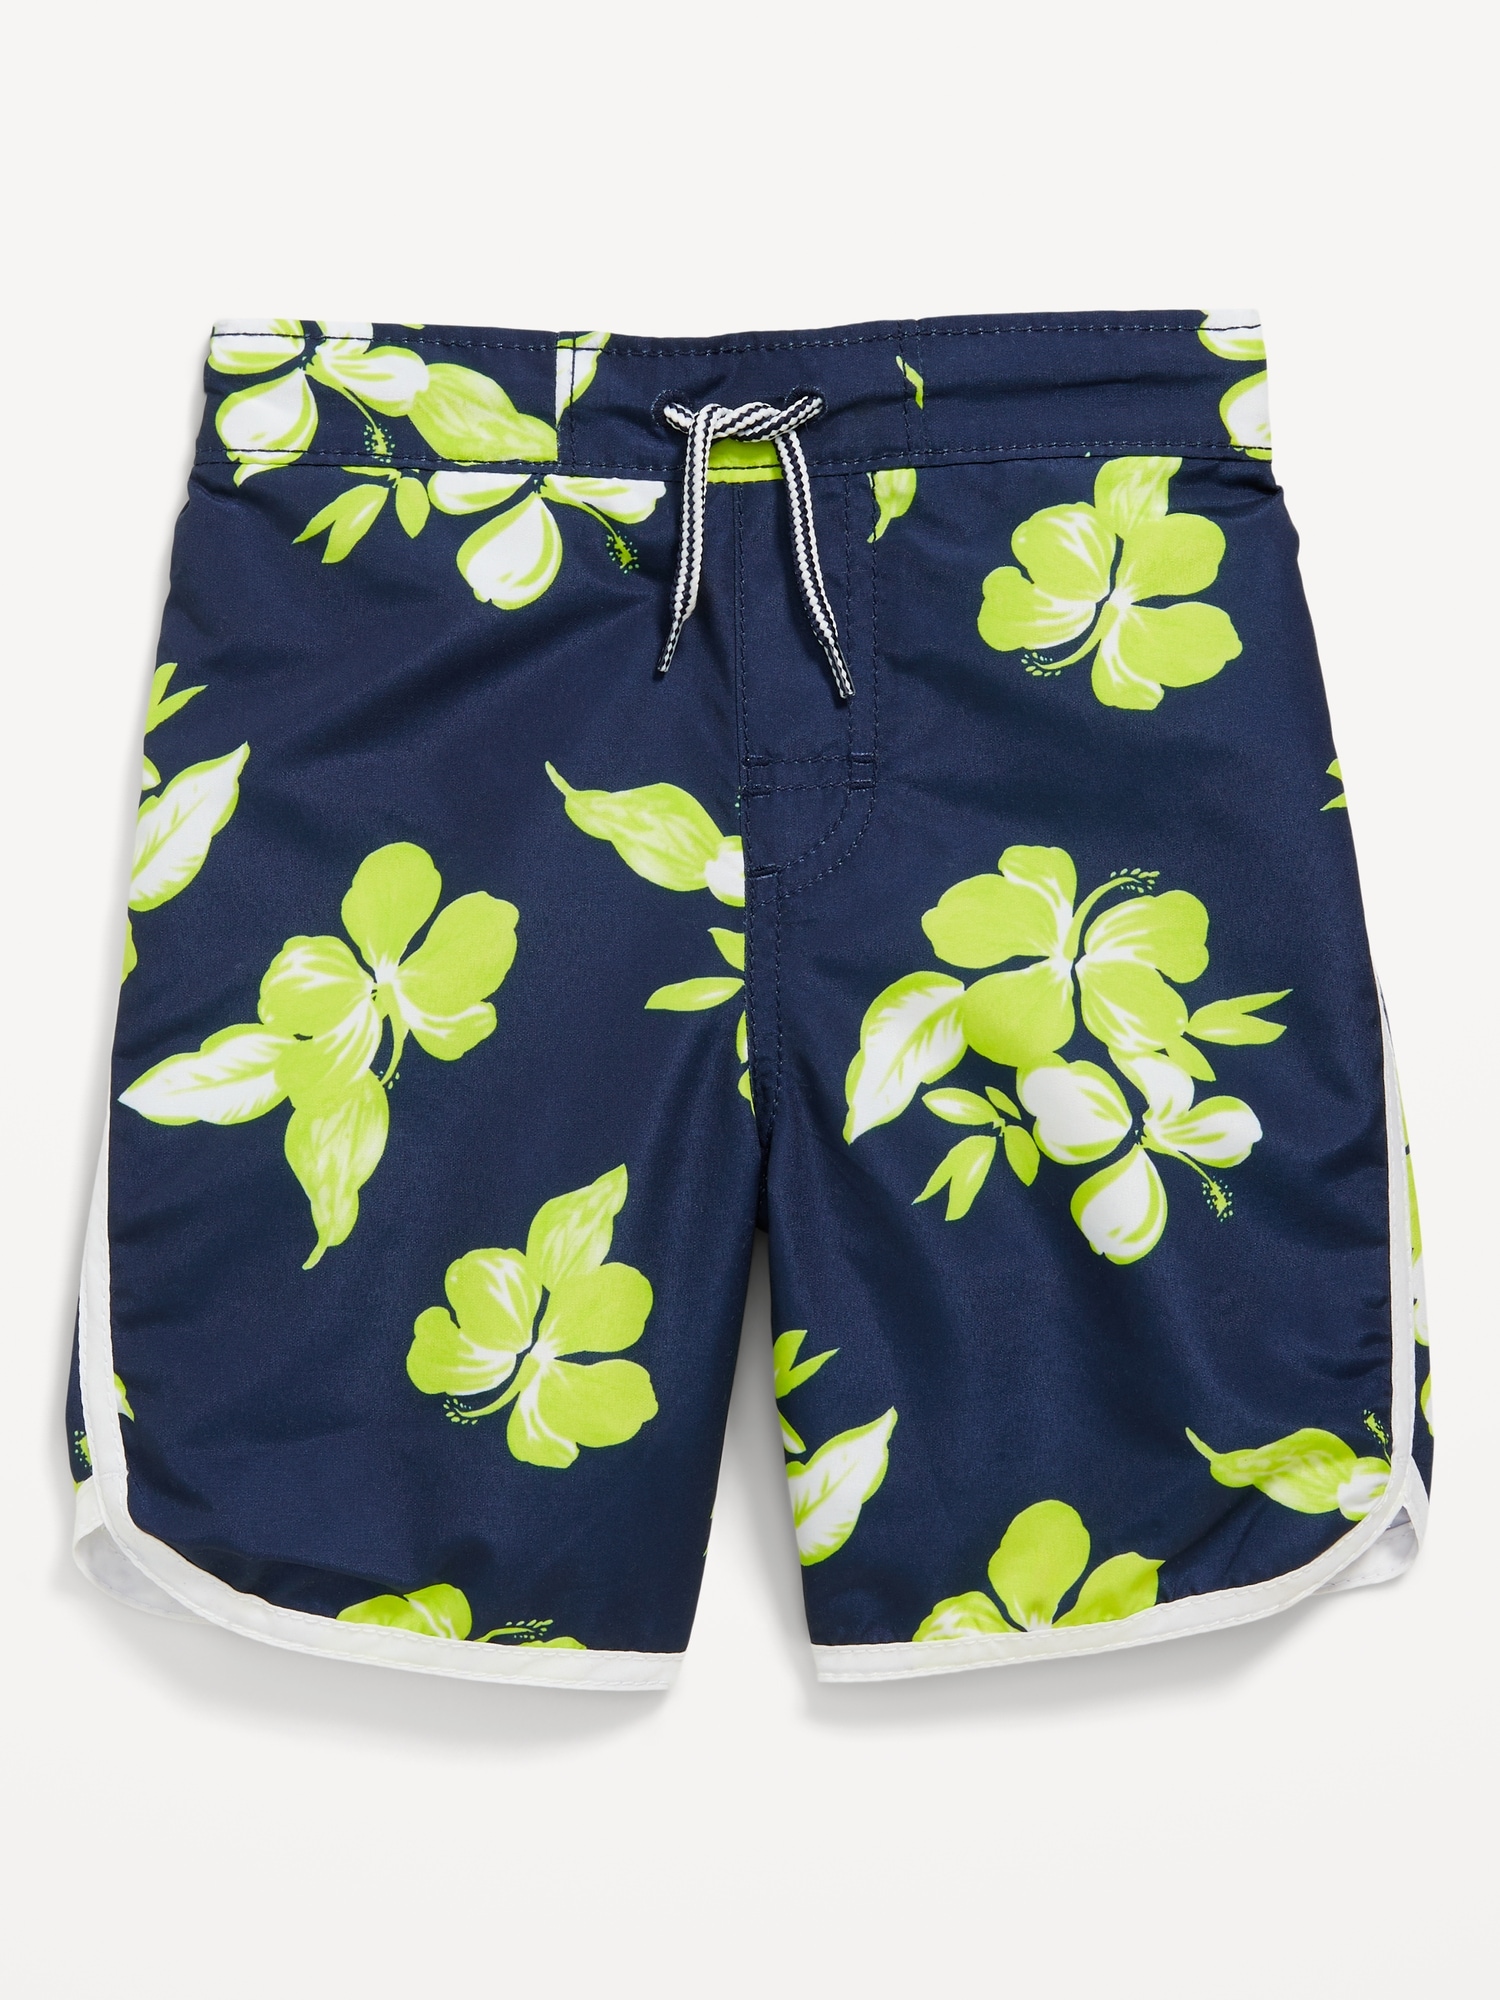 Printed Board Shorts for Toddler Boys